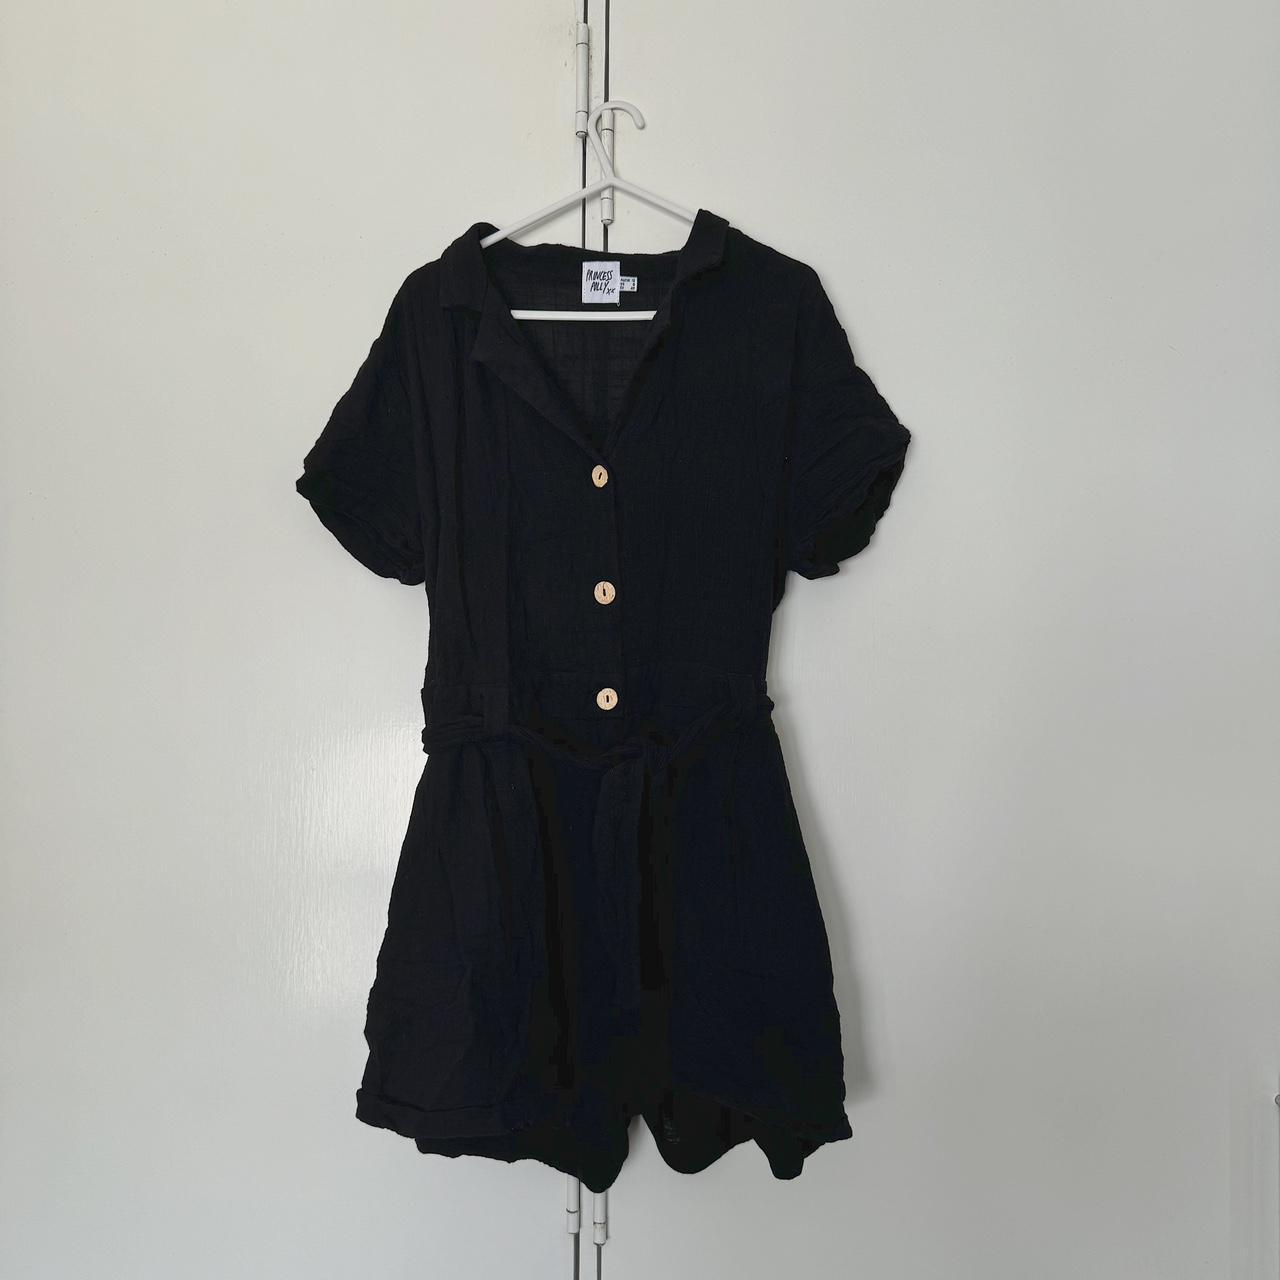 Princess Polly - Ashens Playsuit. Great condition,... - Depop